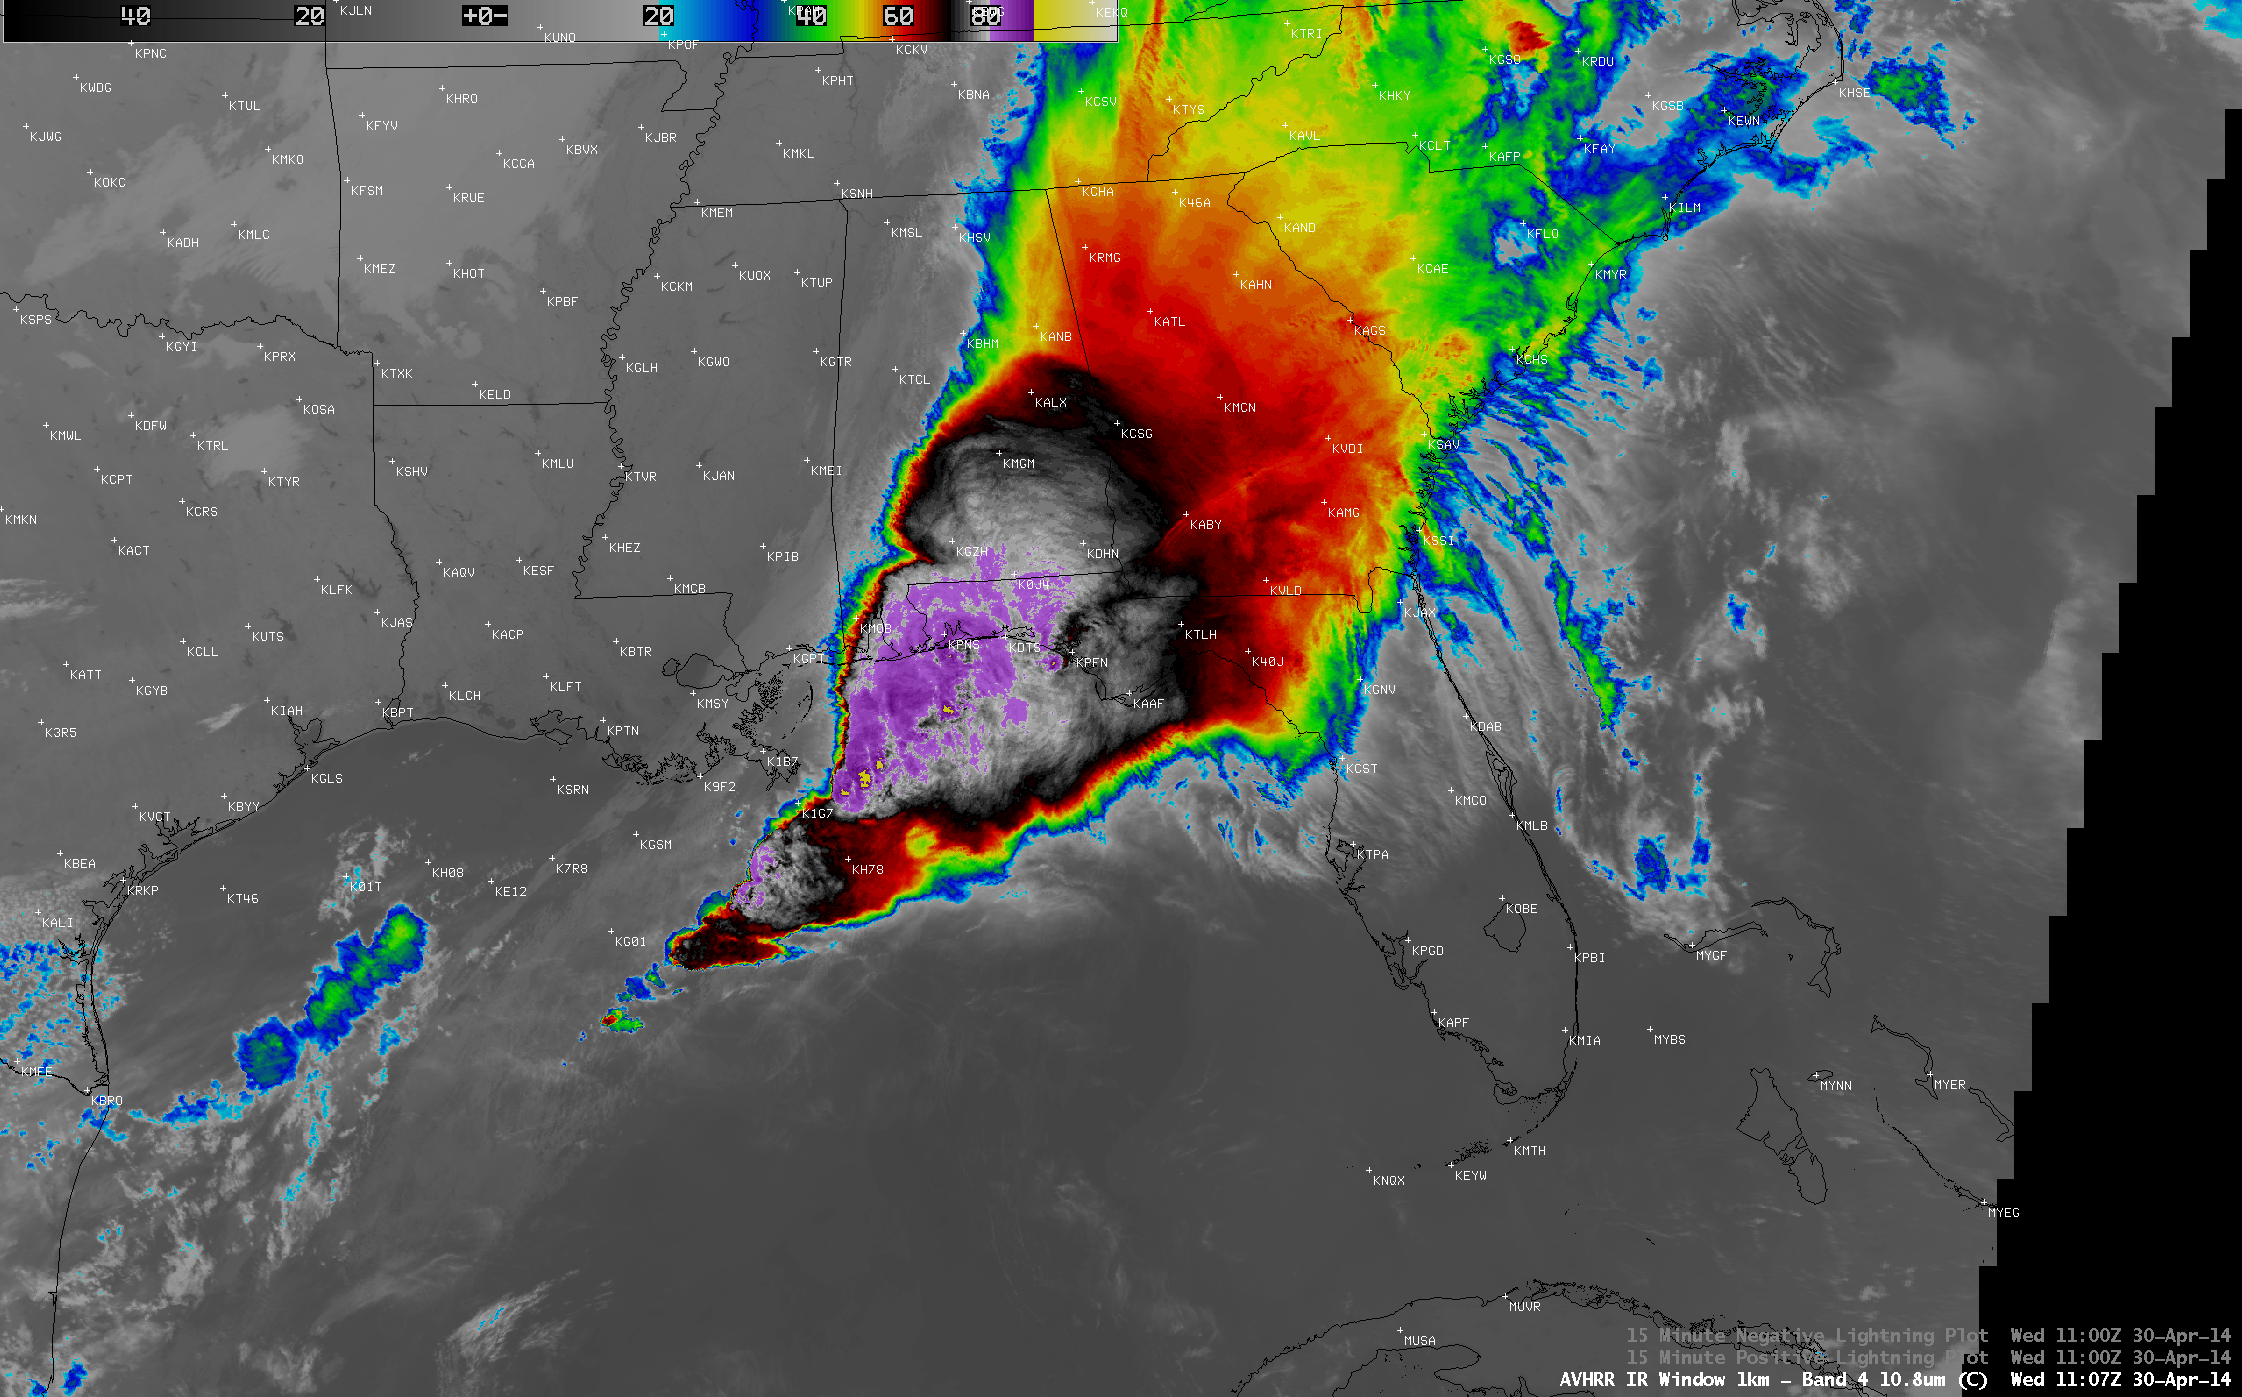 POES AVHRR 10.8 µm IR channel, Cloud Top Temperature product, and Cloud Top Height product at 11:07 UTC